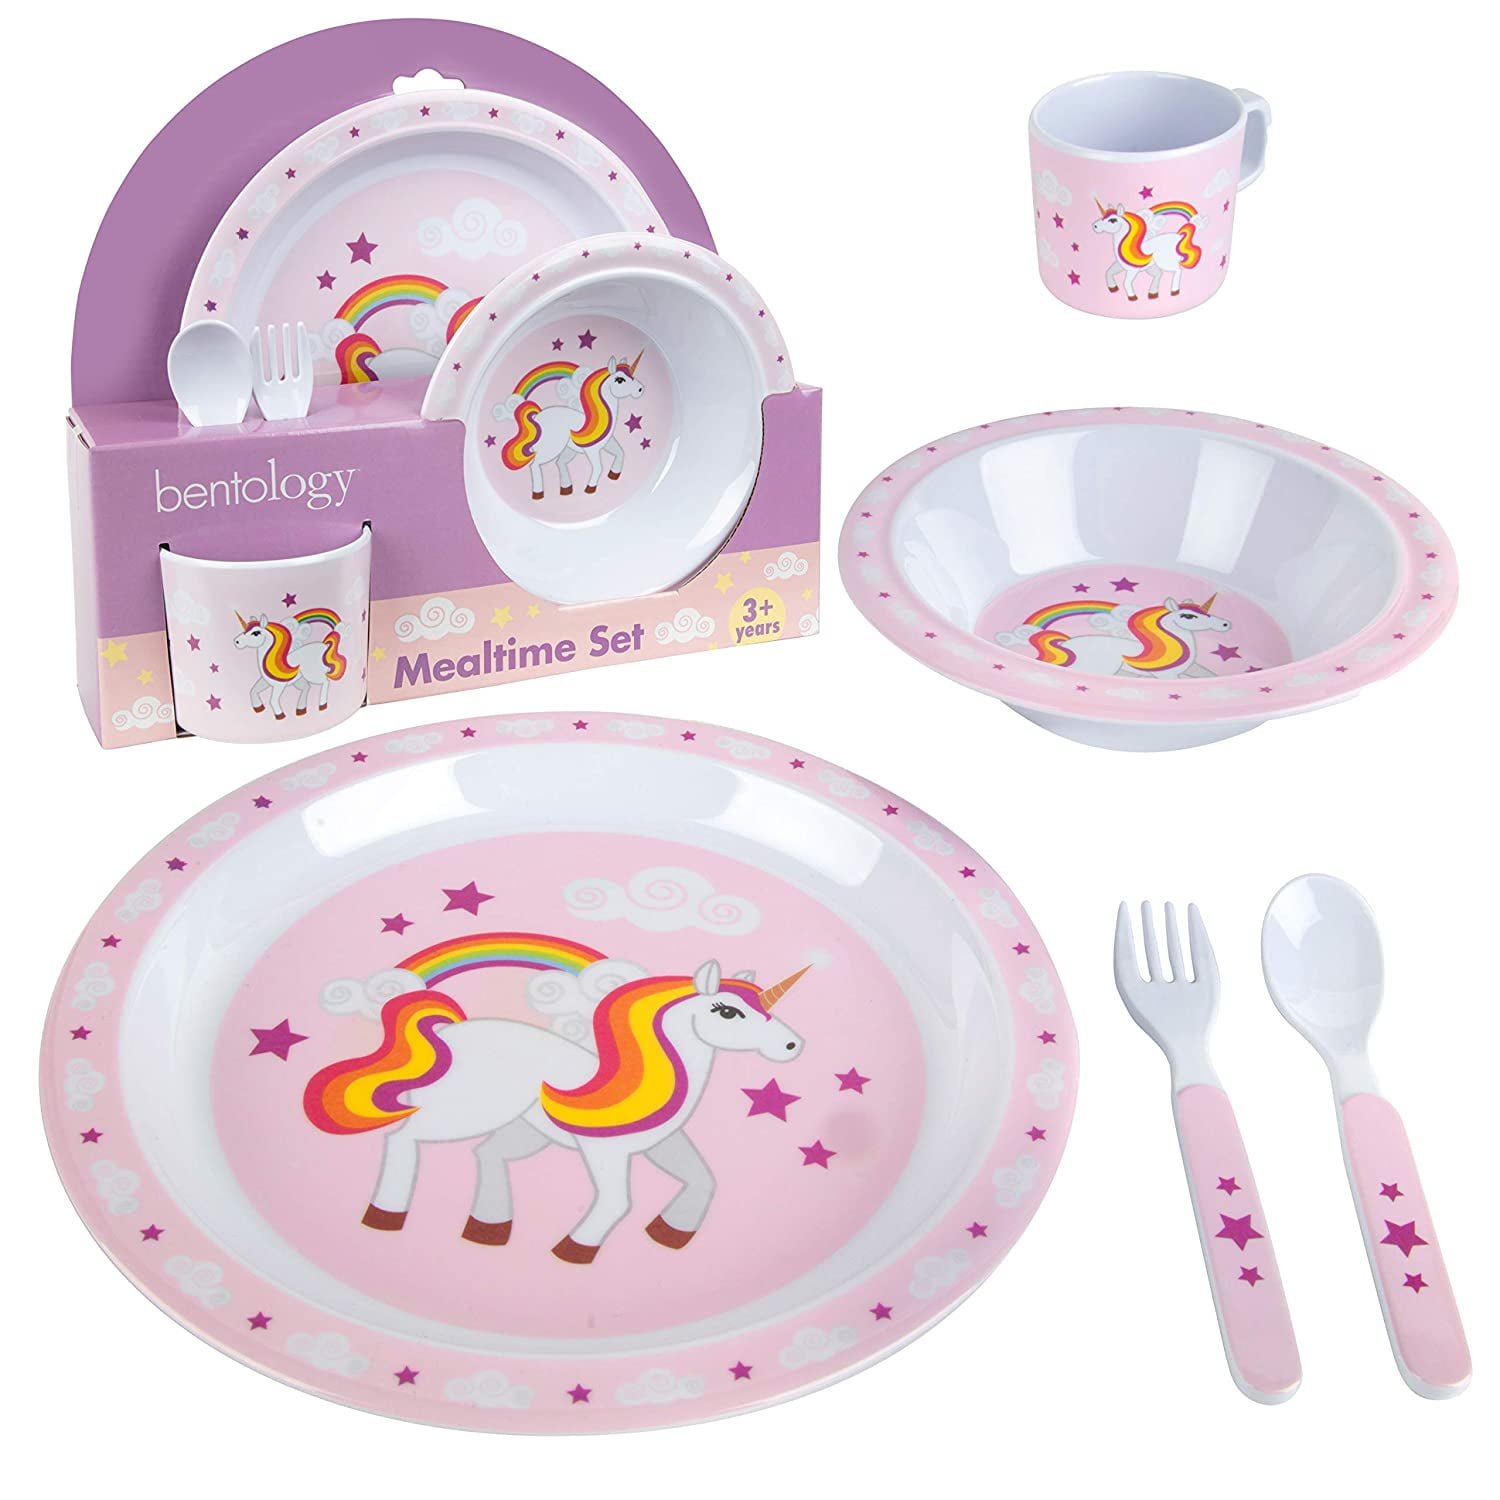 Daniel Tiger 5 Pc Mealtime Feeding Set for Kids and Toddlers - Includes  Plate, Bowl, Cup, Fork and Spoon Utensil Flatware - Durable, Dishwasher  Safe